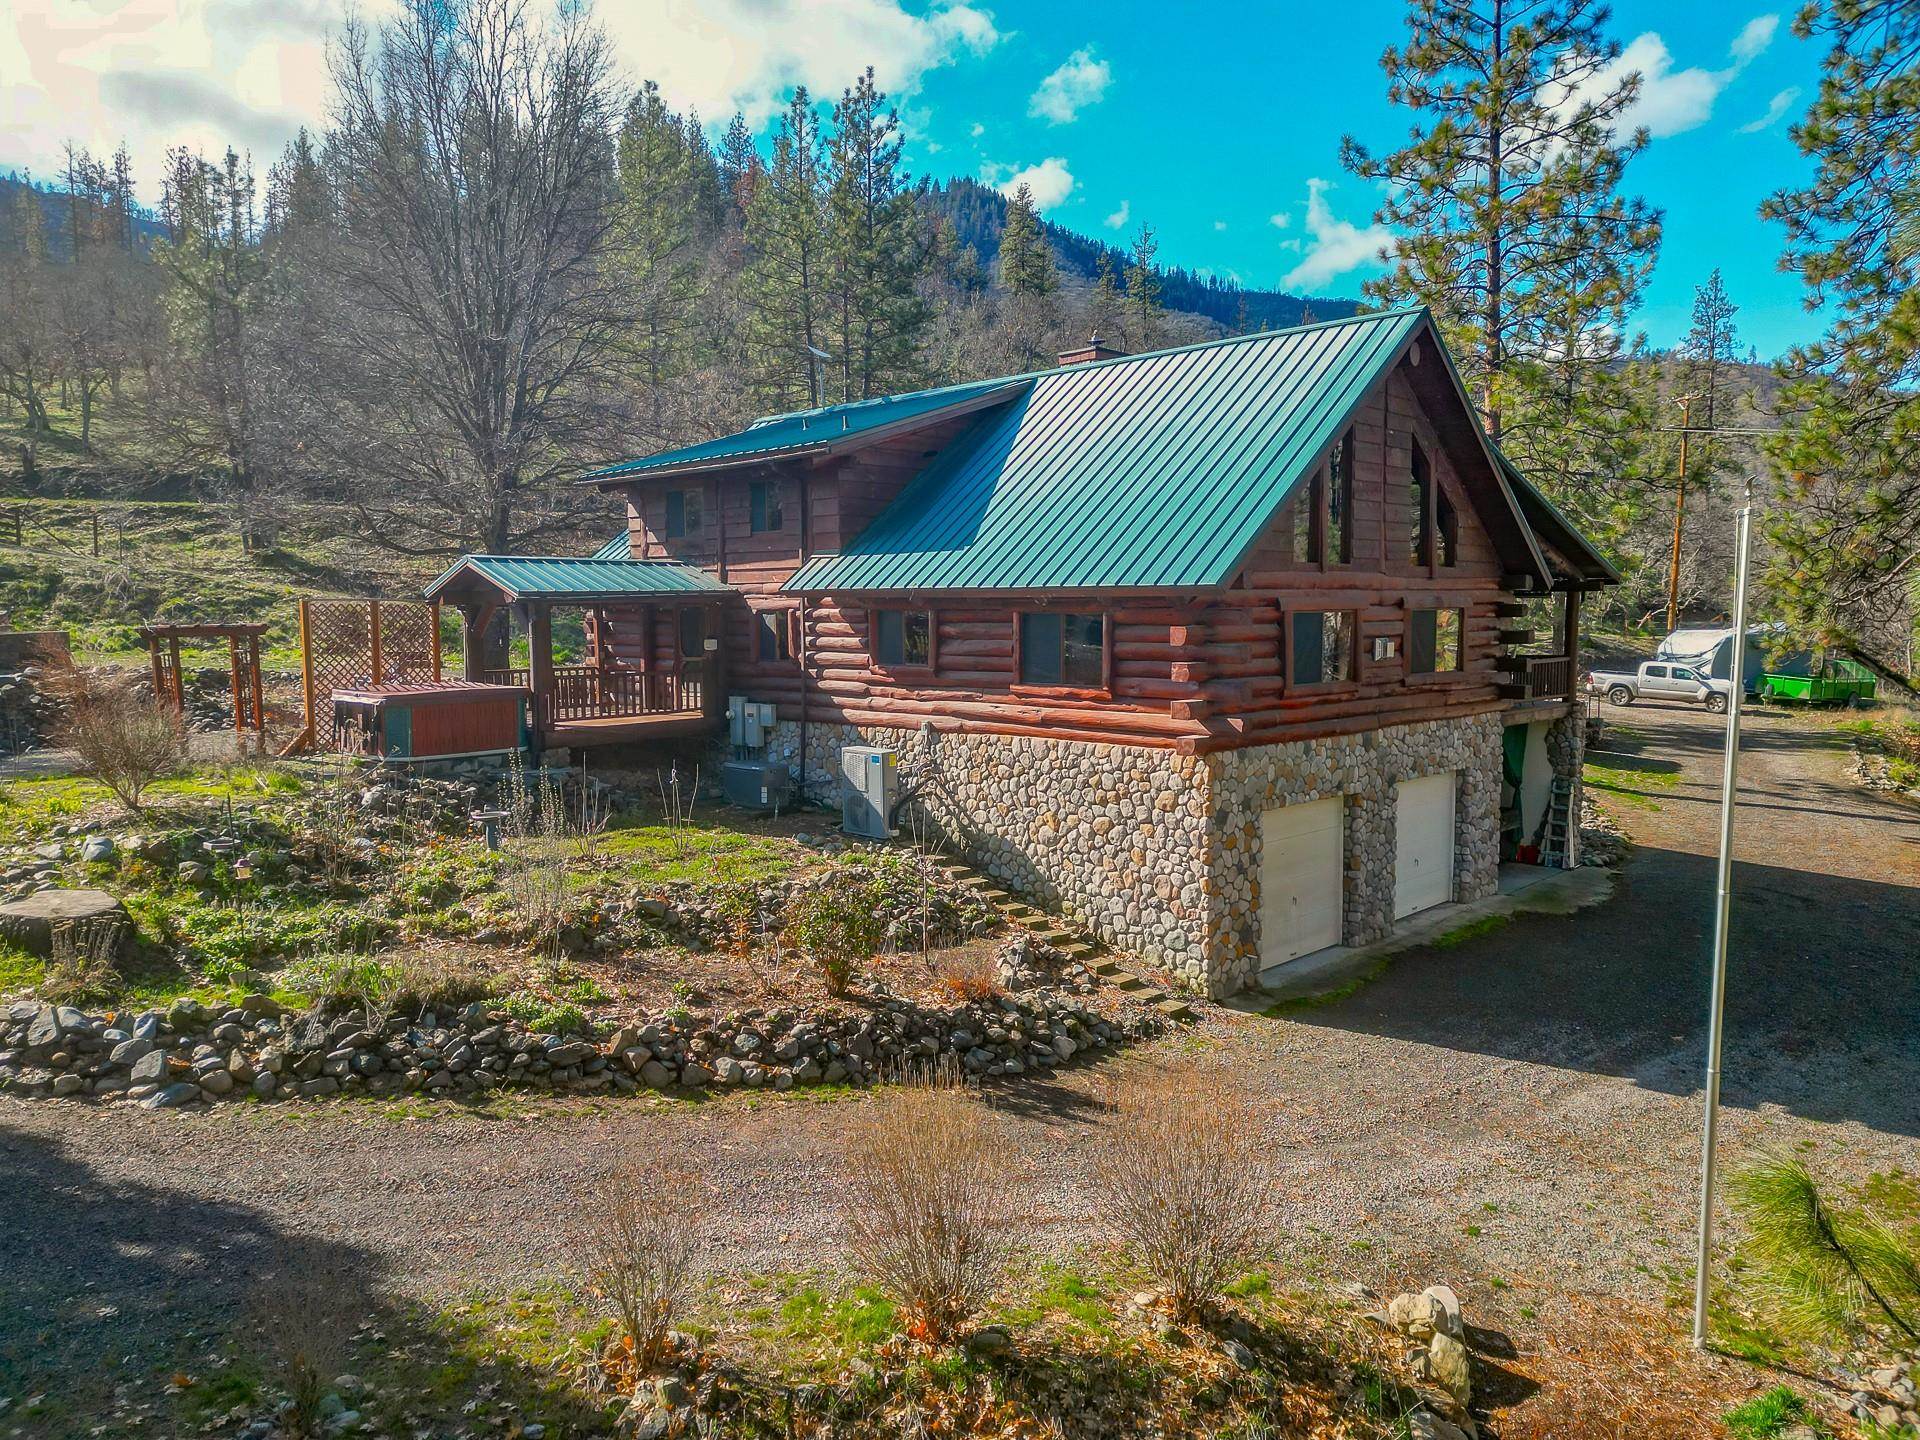 An opportunity you have dreamed about...A custom 5BR 3BA true log home, overlooking an expansive, lush green lawn that transitions to 630+/- feet of prime river frontage. Uniquely placed at the end of the county maintained road, privacy is the order of the day. Whether launching your boat to fish or raft from your private low bank frontage, or, hiking and ATV'ing the hundreds of miles of trails/roads on the thousands of acres of Klamath National Forest out of your gate..."BORED" will never be a word you will hear your family speak. Relax from the days adventures in the 8 person hot tub, or from the 50x12 covered porch facing the rapids. The home has been tastefully upgraded with new flooring, central heat & A/C, oversized 2 person jacuzzi tub, 20' rock fireplace, and much more! Invite friends to visit, 2 full RV hookups & 1 with electricity only. Fruit trees, raised garden beds, back up generator, Starlink Internet  and DSL available.